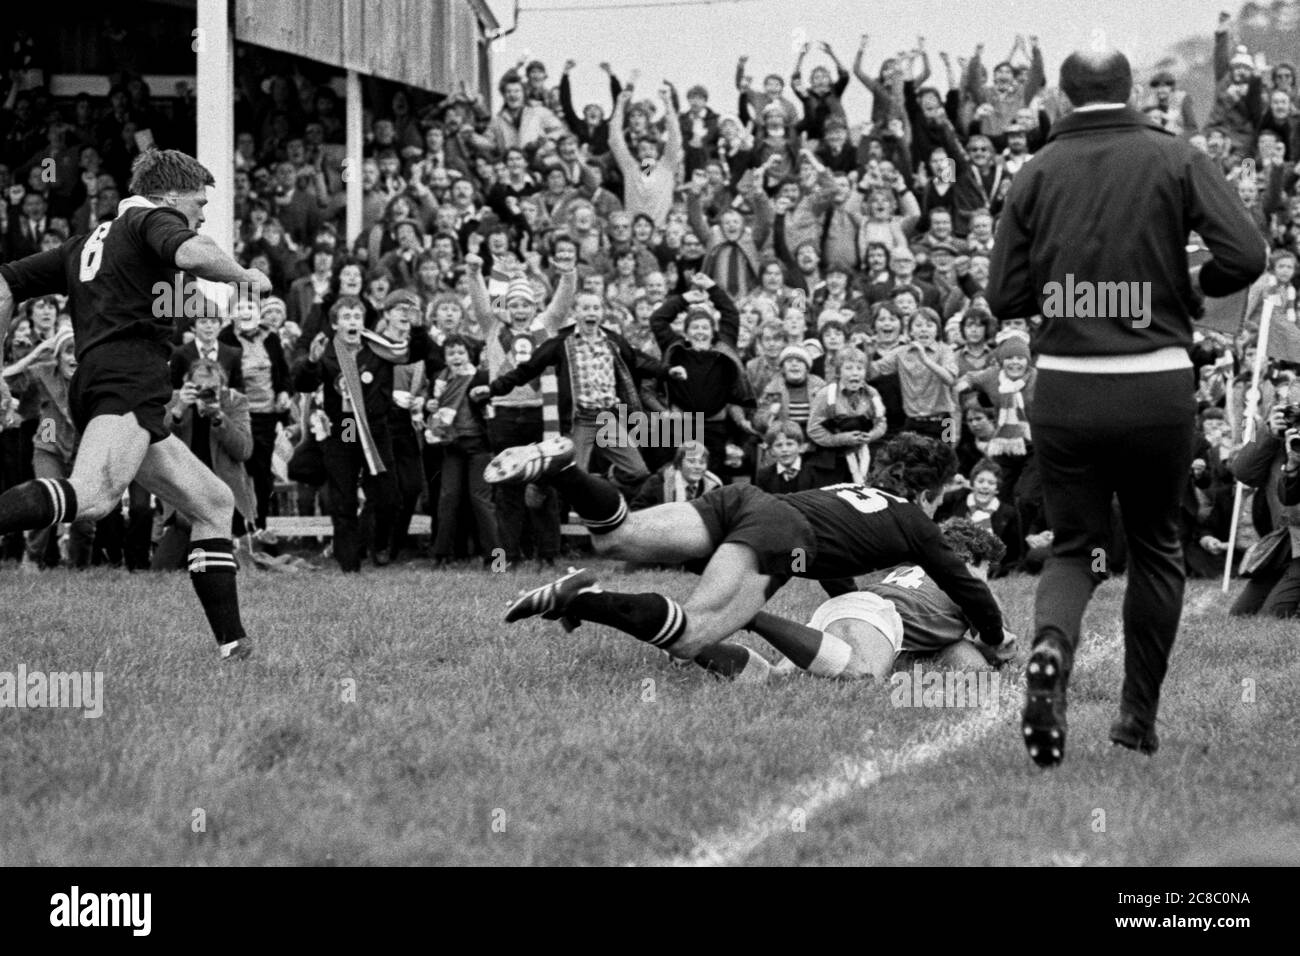 Llanelli RFC winger Mark Jones scoring the opening try in their game against the touring New Zealand All Blacks at Stradey Park, Llanelli, Wales on 21 October 1980. Stock Photo